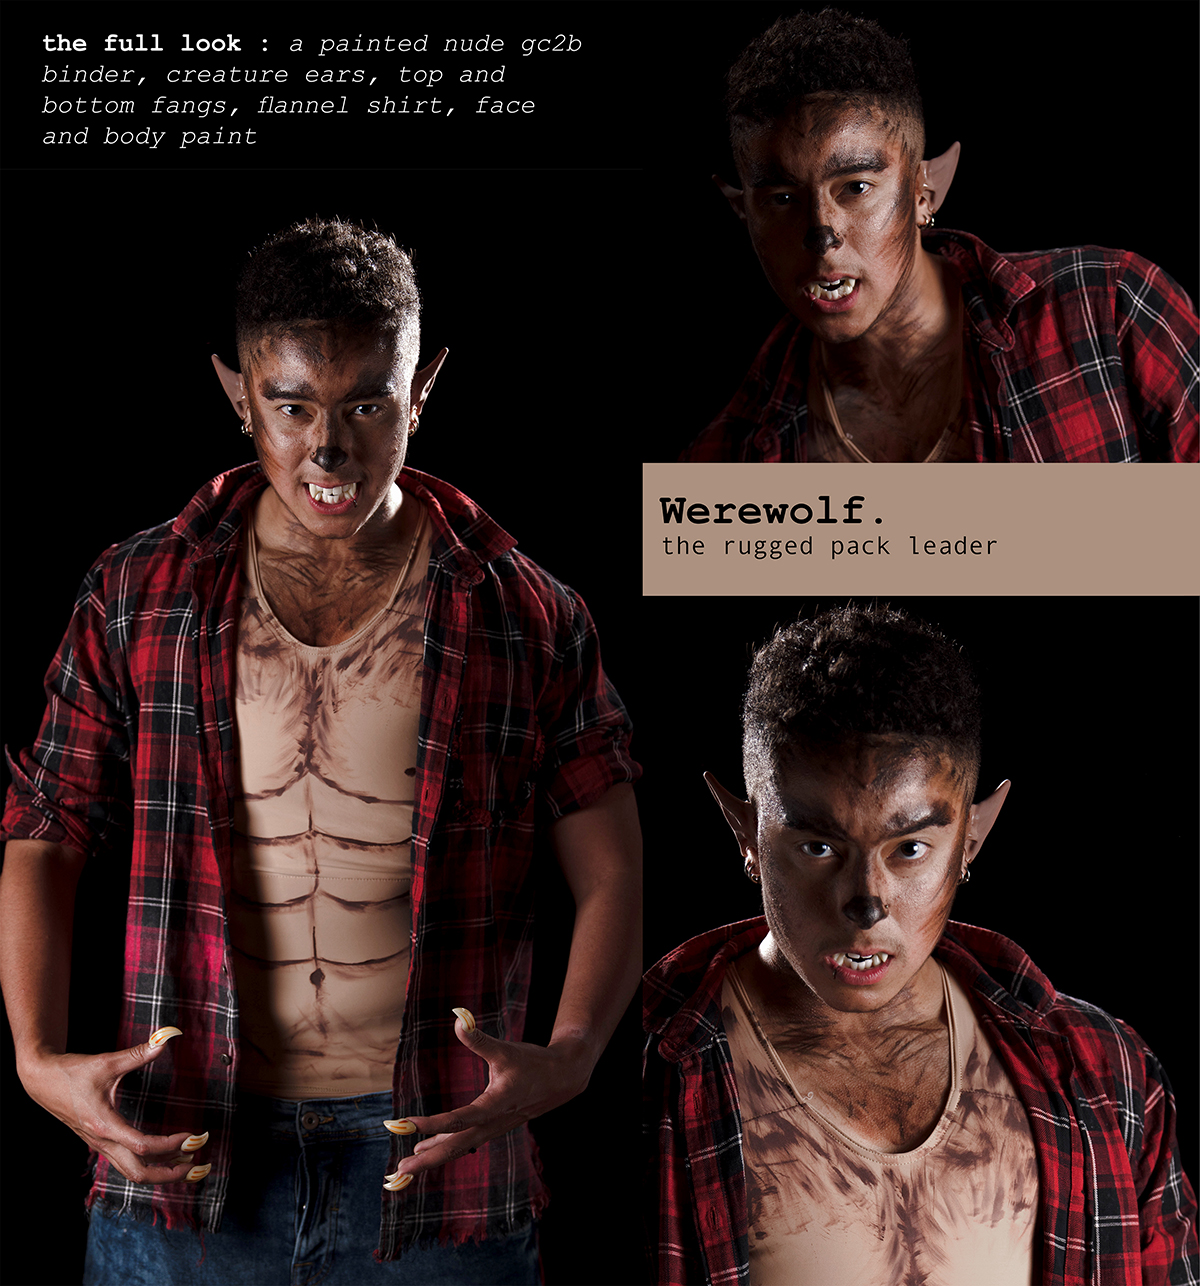 Werewolf. the rugged pack leader / the full look: A Painted Nude gc2b Binder, Creature Ears, Top and Bottom Fangs, Flannel Shirt, Face and Body Paint